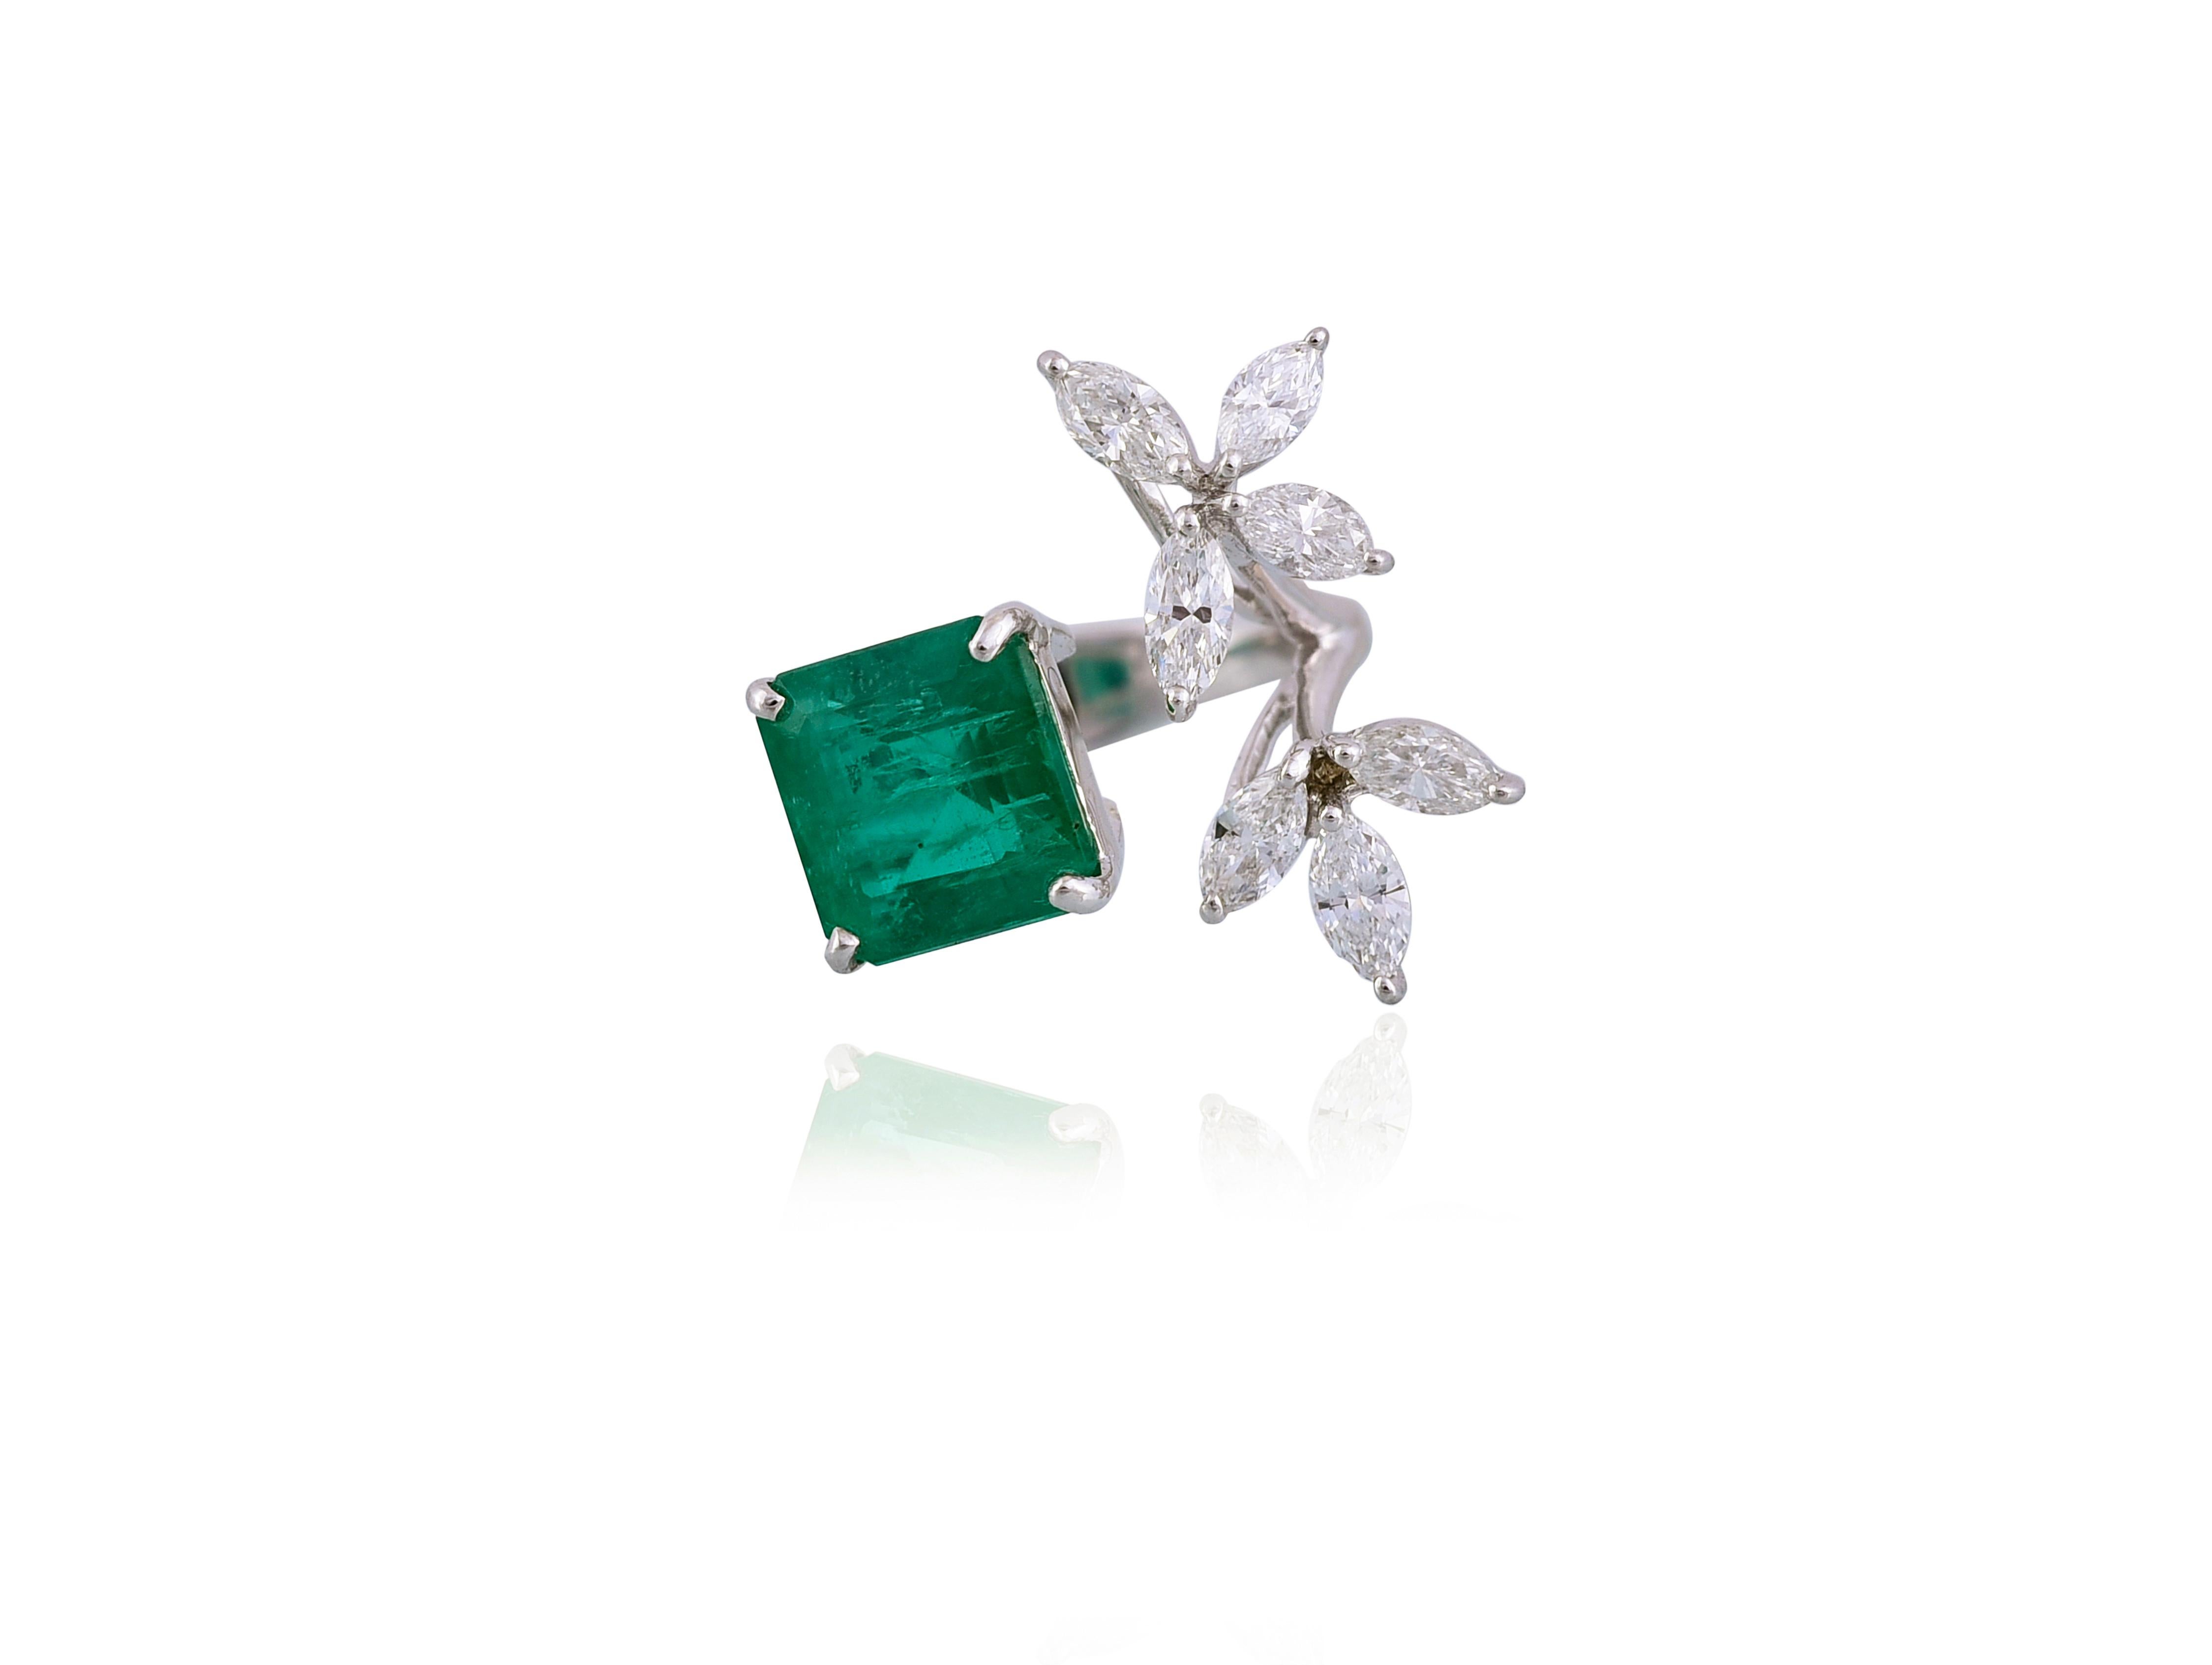 Marquise Cut Set in 18k Gold, 4.23 Carat Zambian Emerald and Marquise Diamonds Cocktail Ring